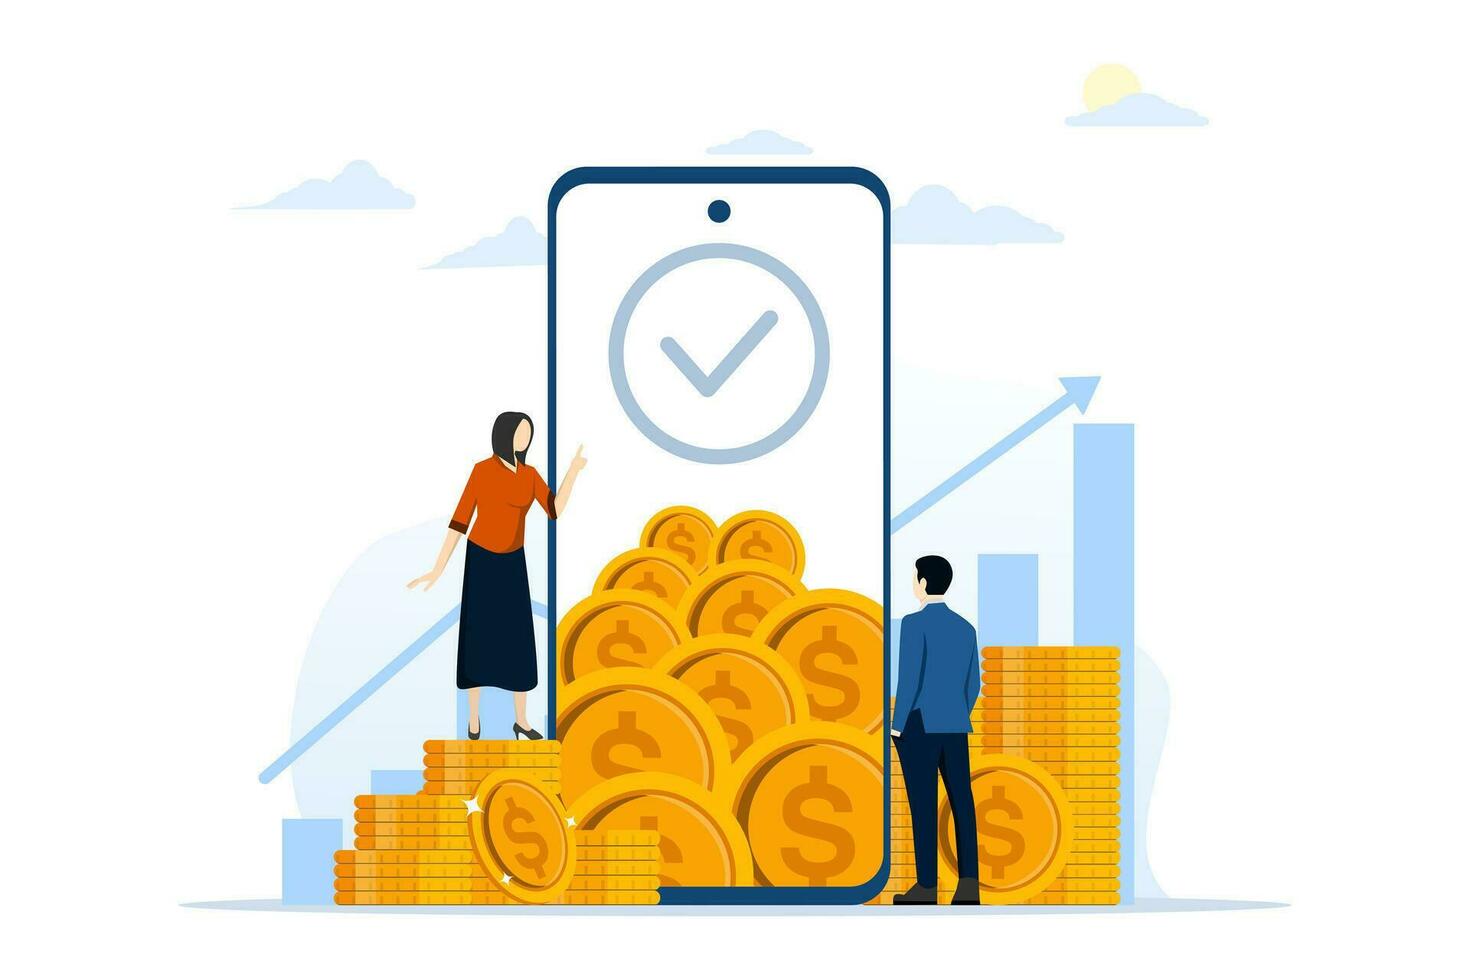 Business people explain how to increase financial value through smartphones. Businessman next to pile of gold coins. Social media, E-commerce, Big phone. Flat vector illustration on background.